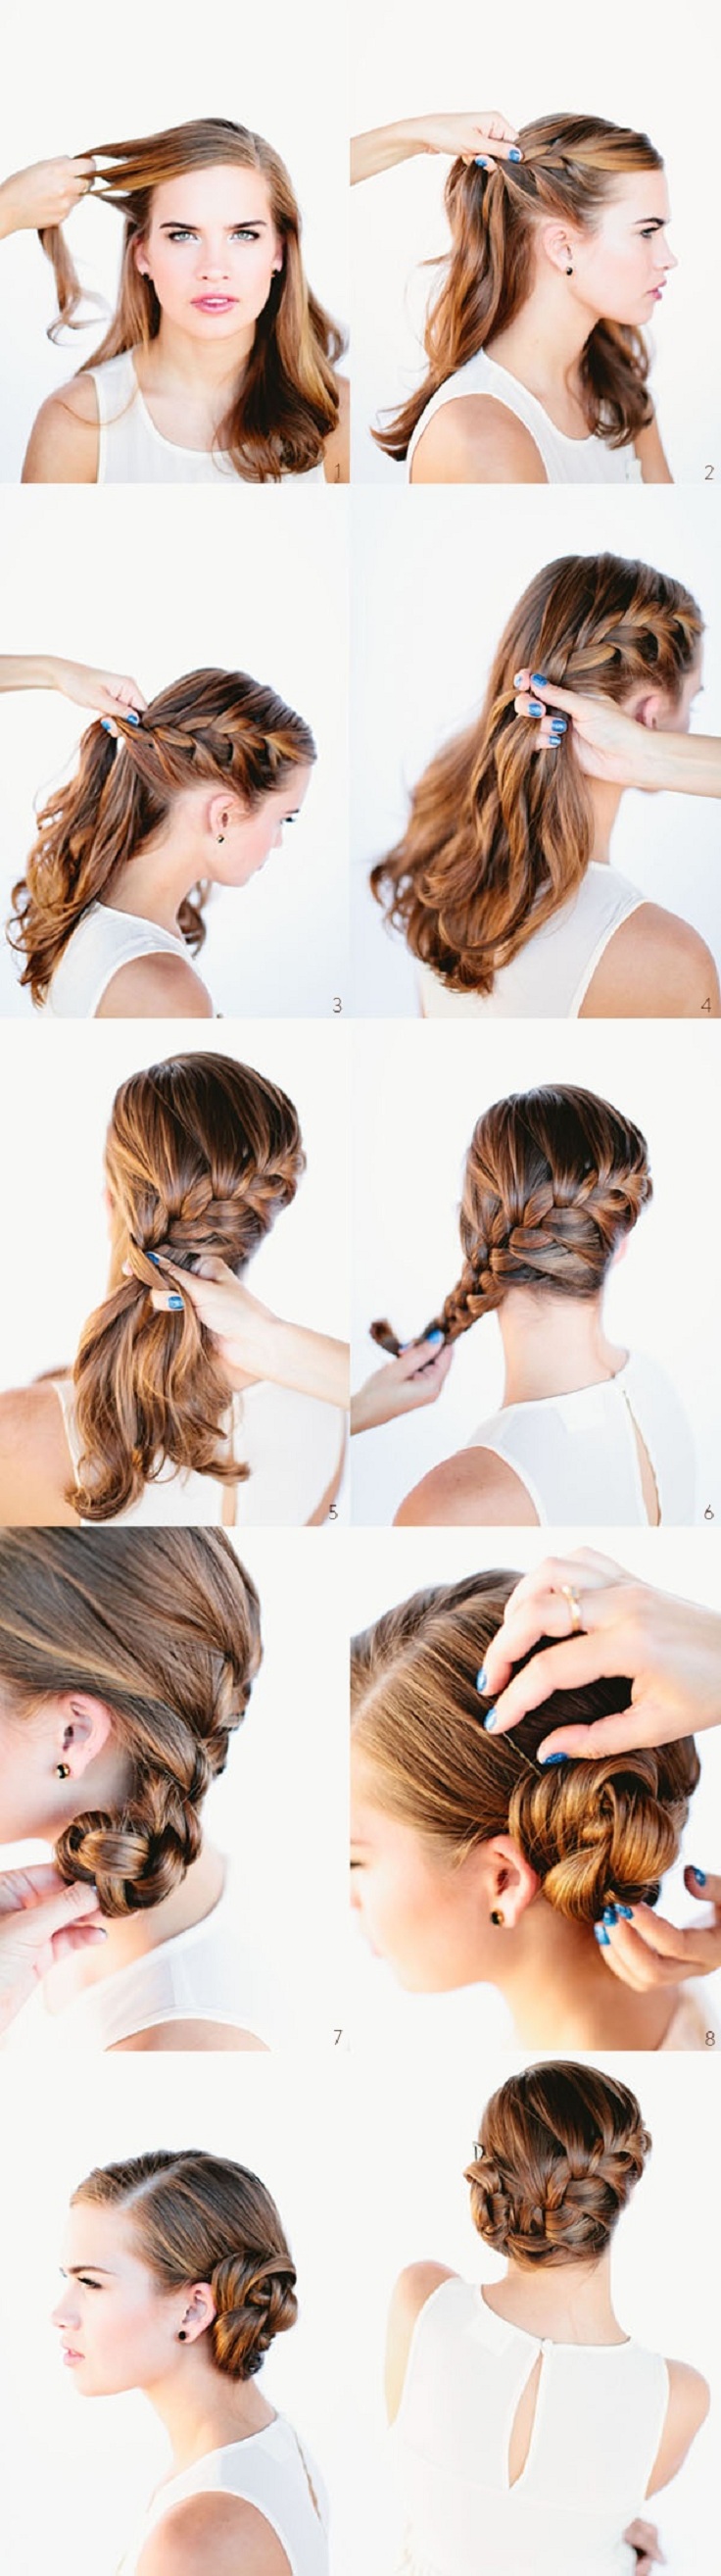 Hair Braid Tutorials - Easy to be done [Top 10] - Top Inspired